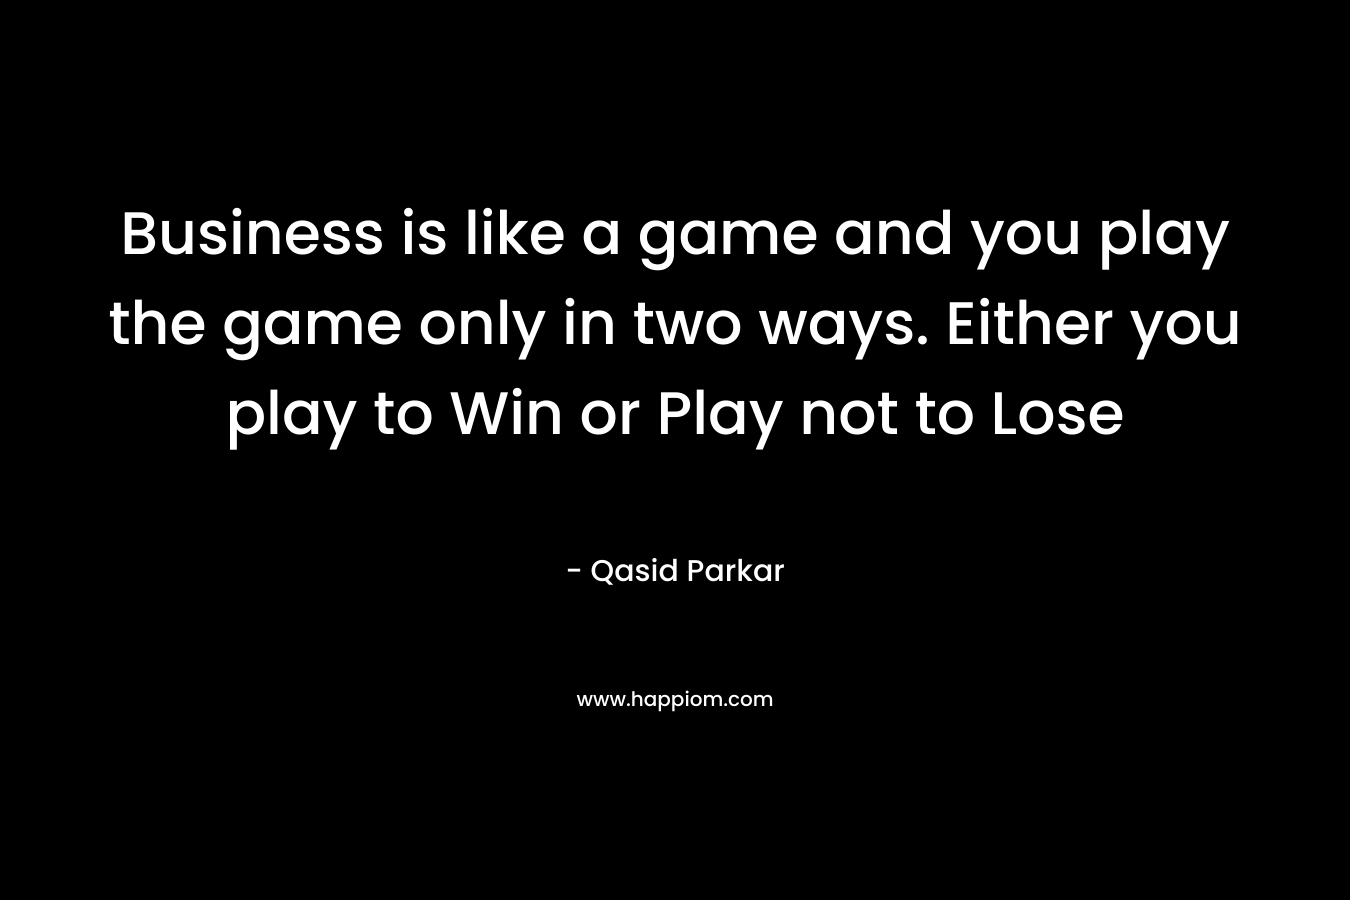 Business is like a game and you play the game only in two ways. Either you play to Win or Play not to Lose